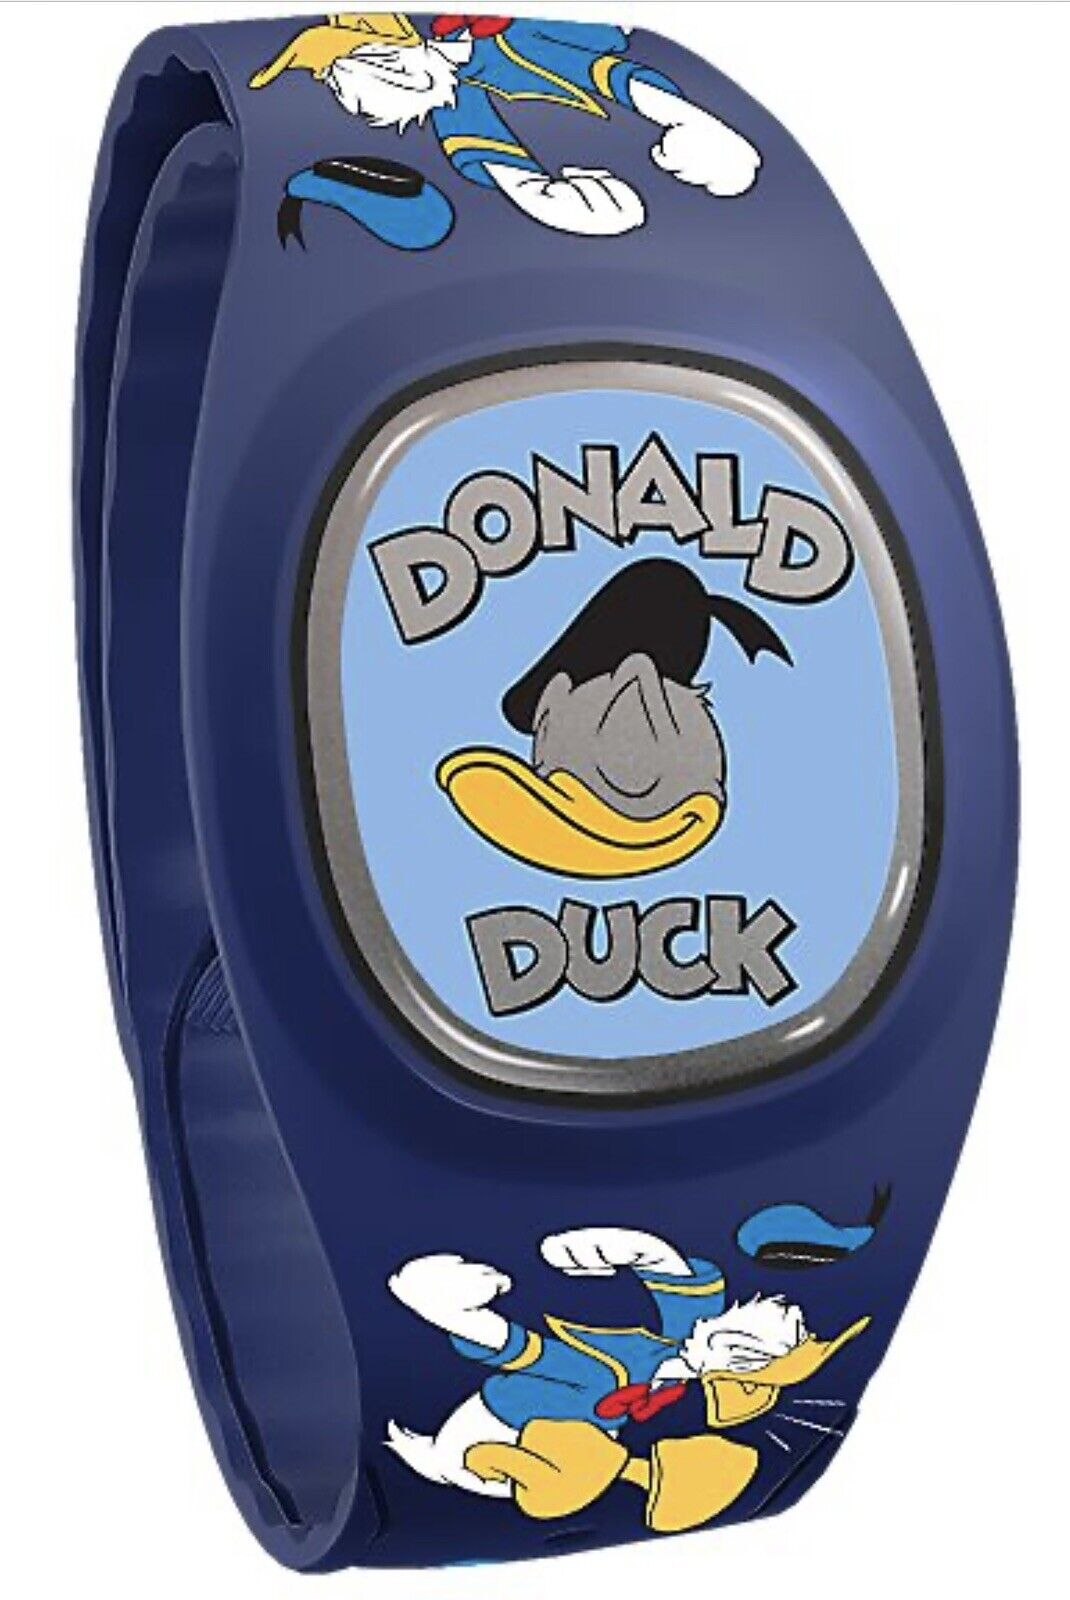 Disney Parks Classic Donald Duck Expressions Blue Magicband Plus Unlinked - NEW